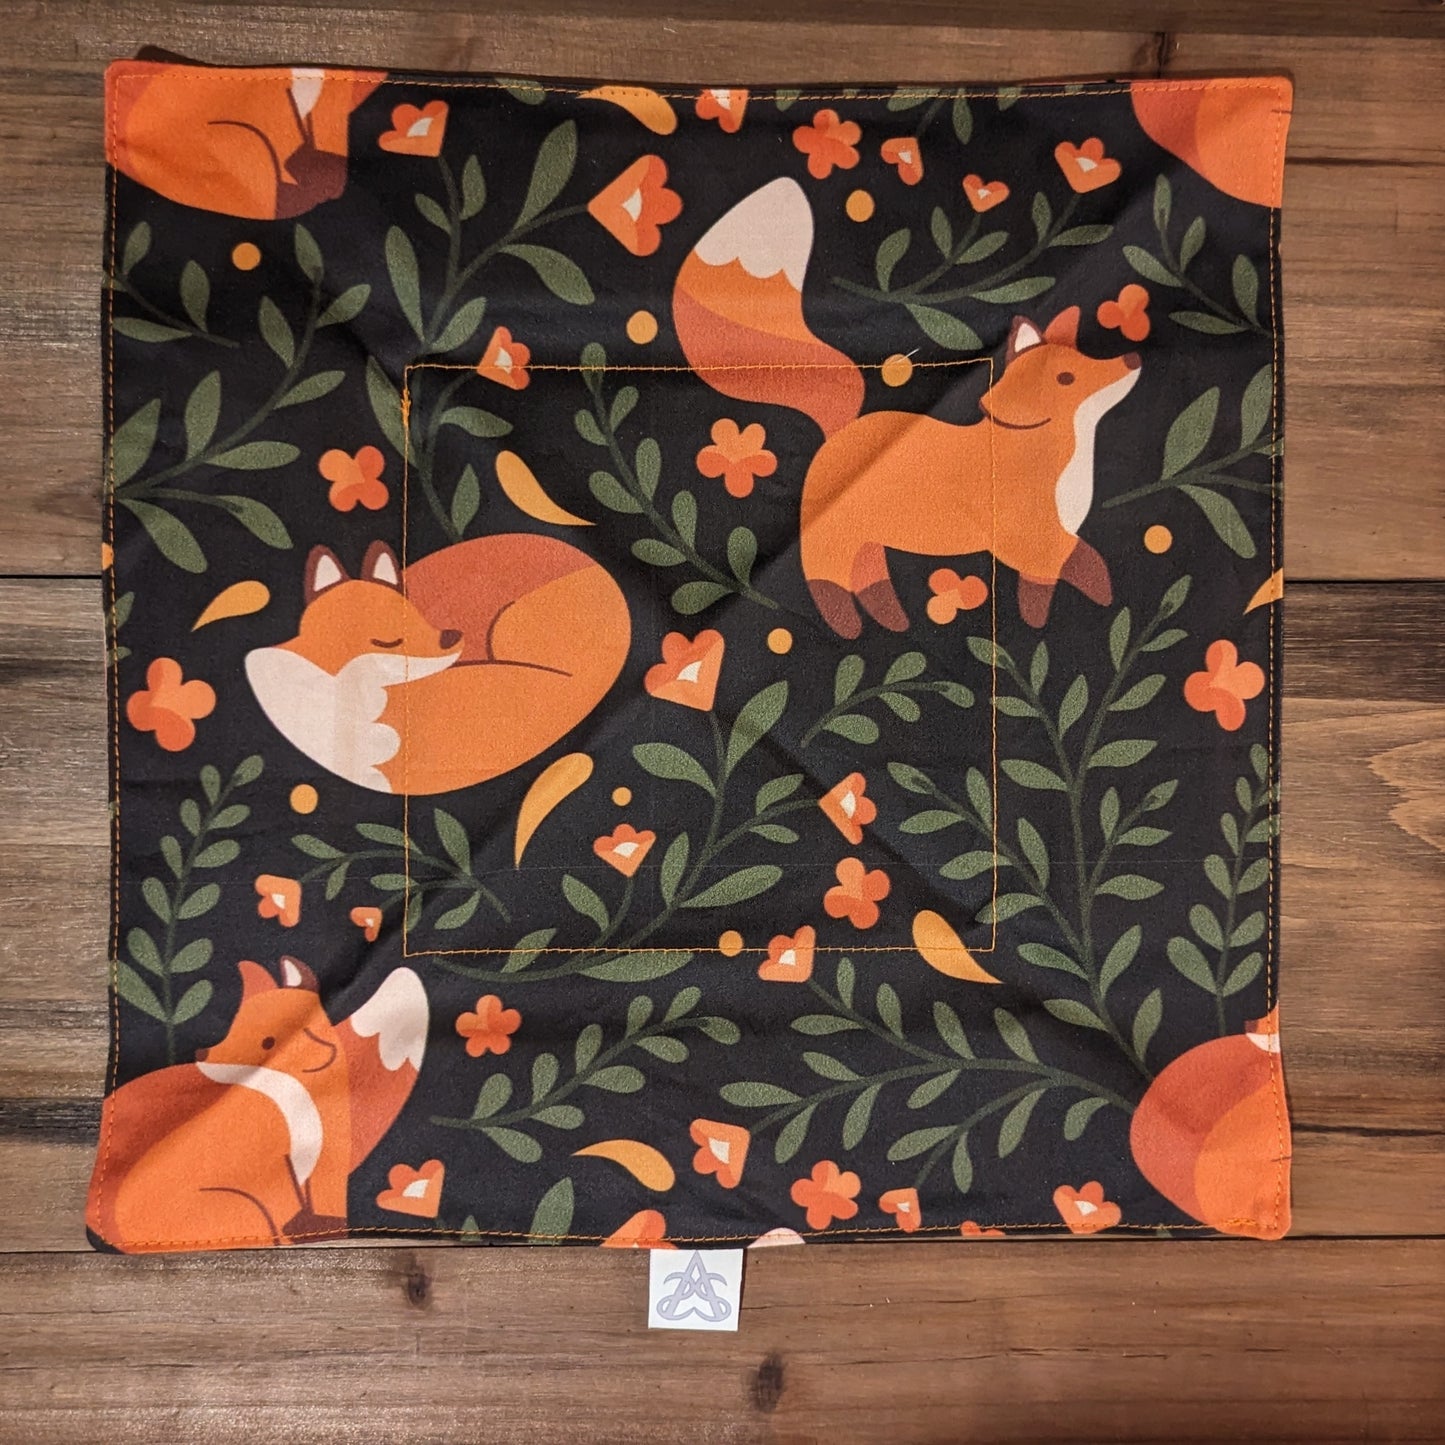 The Cozy Foxes tray laid flat to show the fox design.